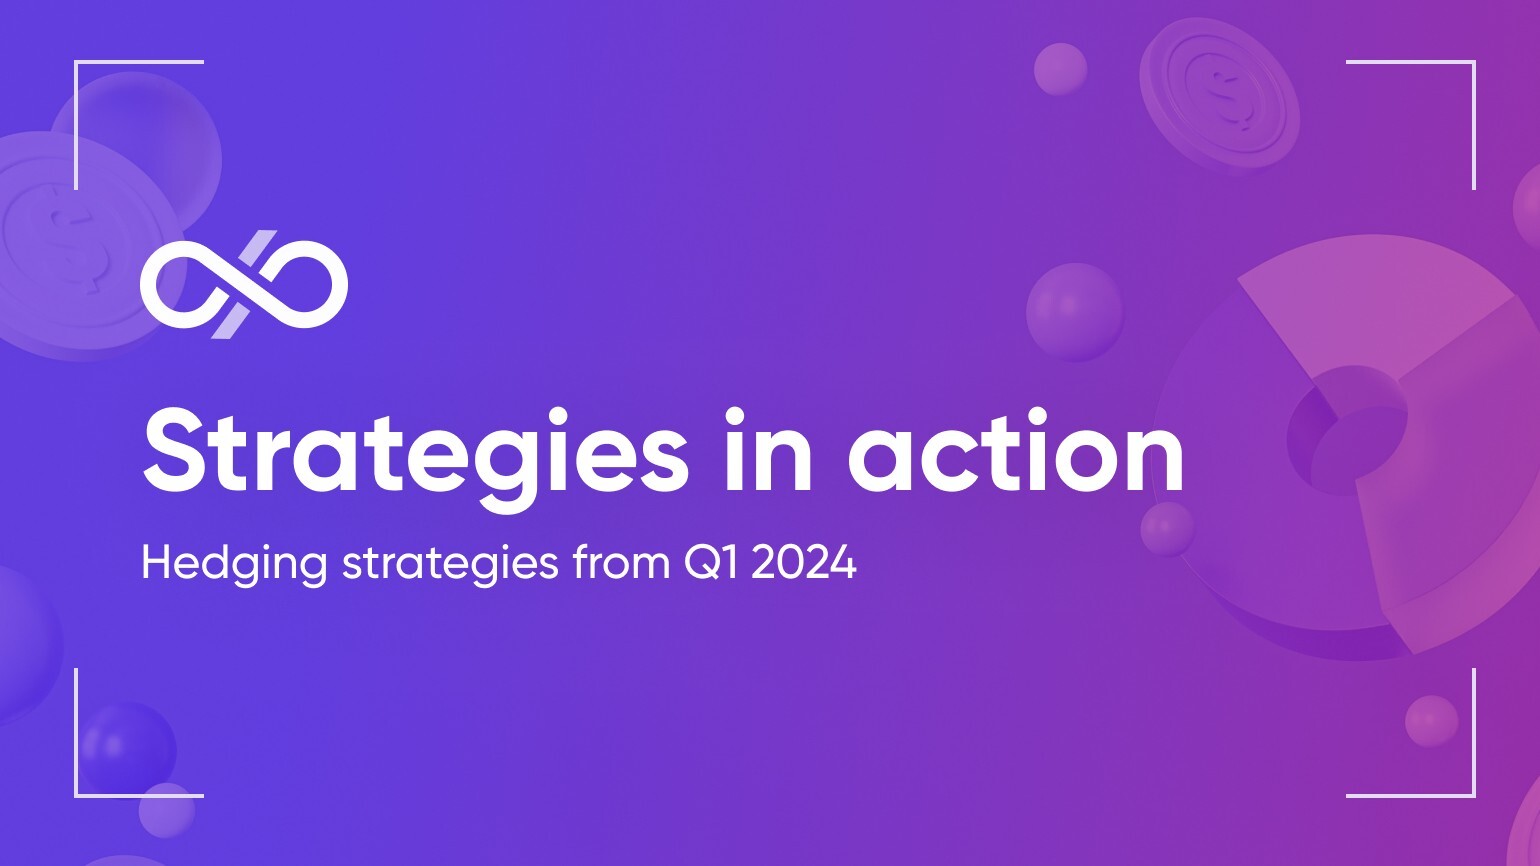 Strategies in action - Hedging strategies from Q1 2024